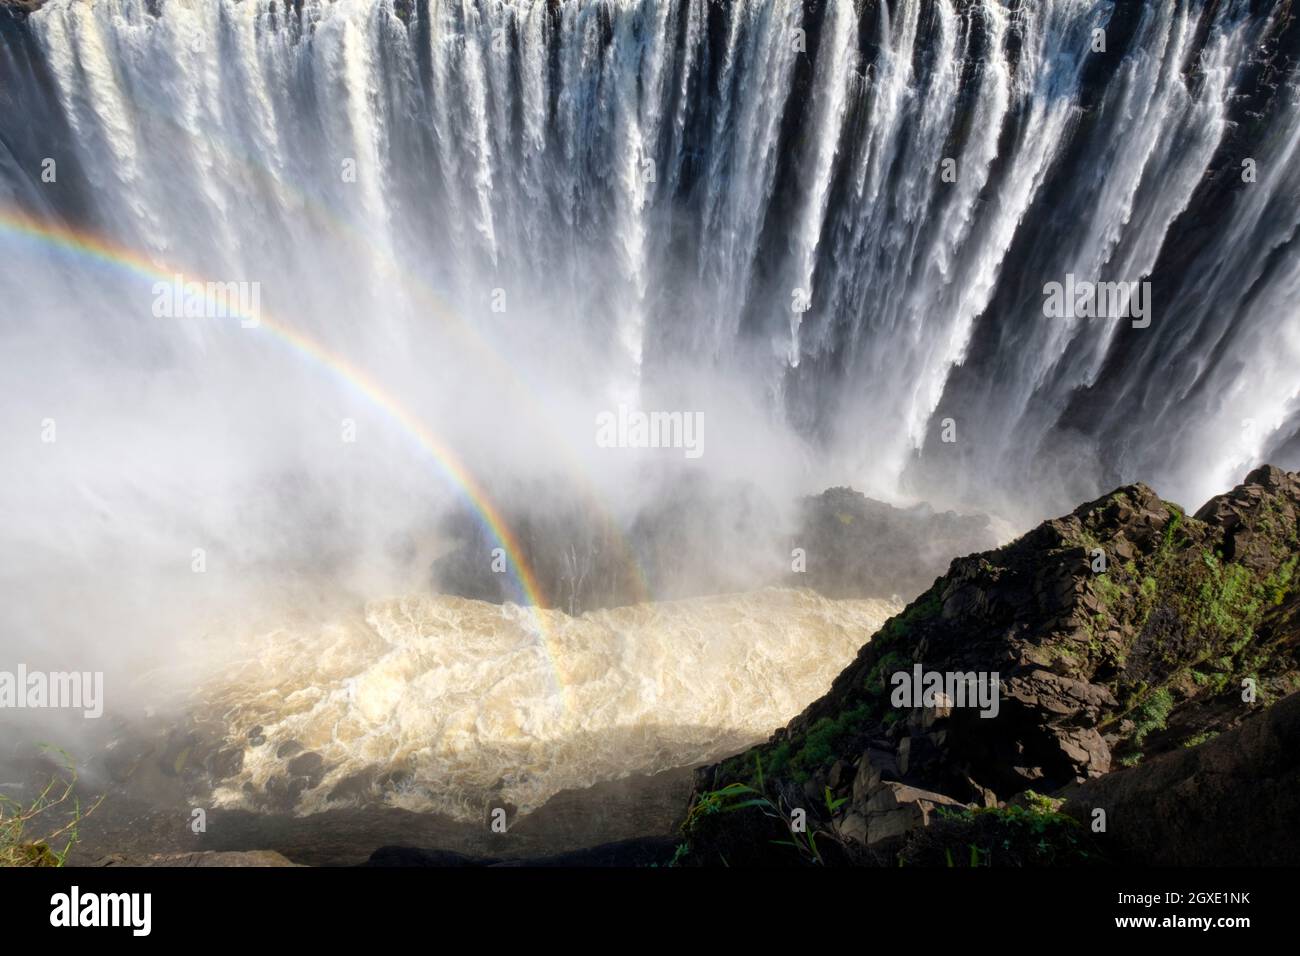 Victoria Falls long Gorge with rainbow. Victoria Falls National ParkZimbabwe, Africa Stock Photo